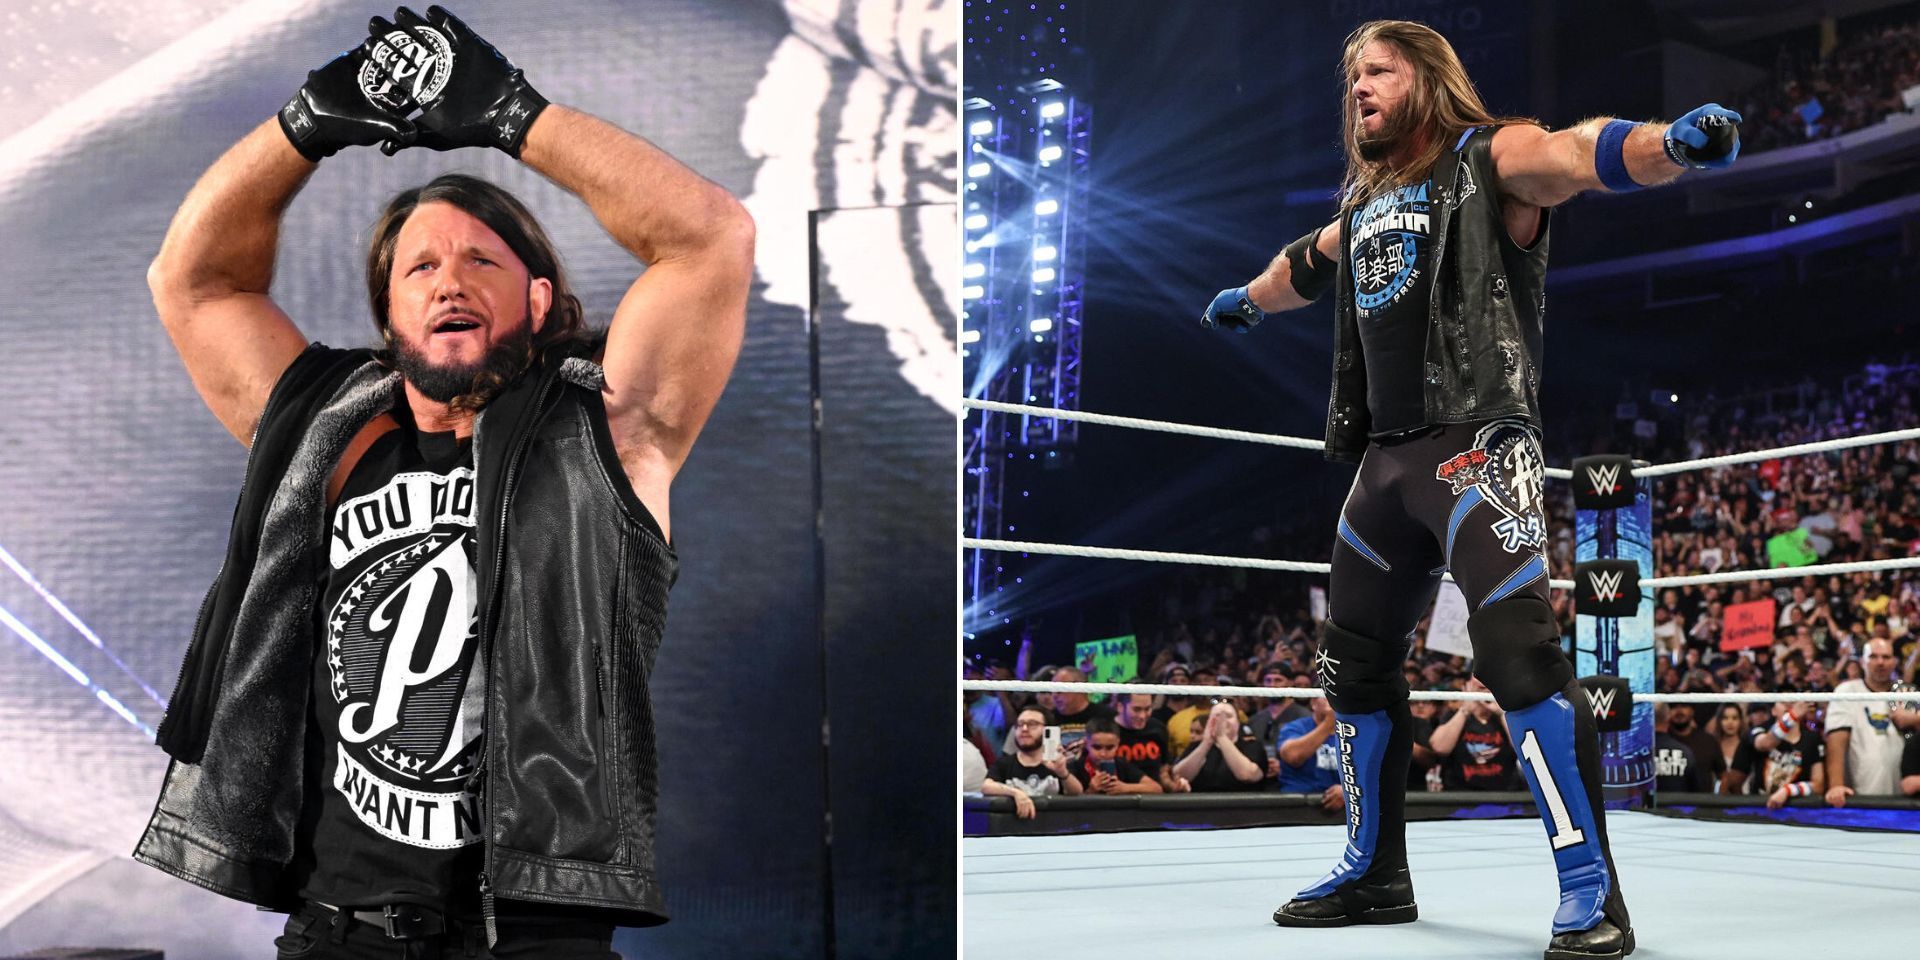 A former WWE star commented on AJ Styles getting him a tryout